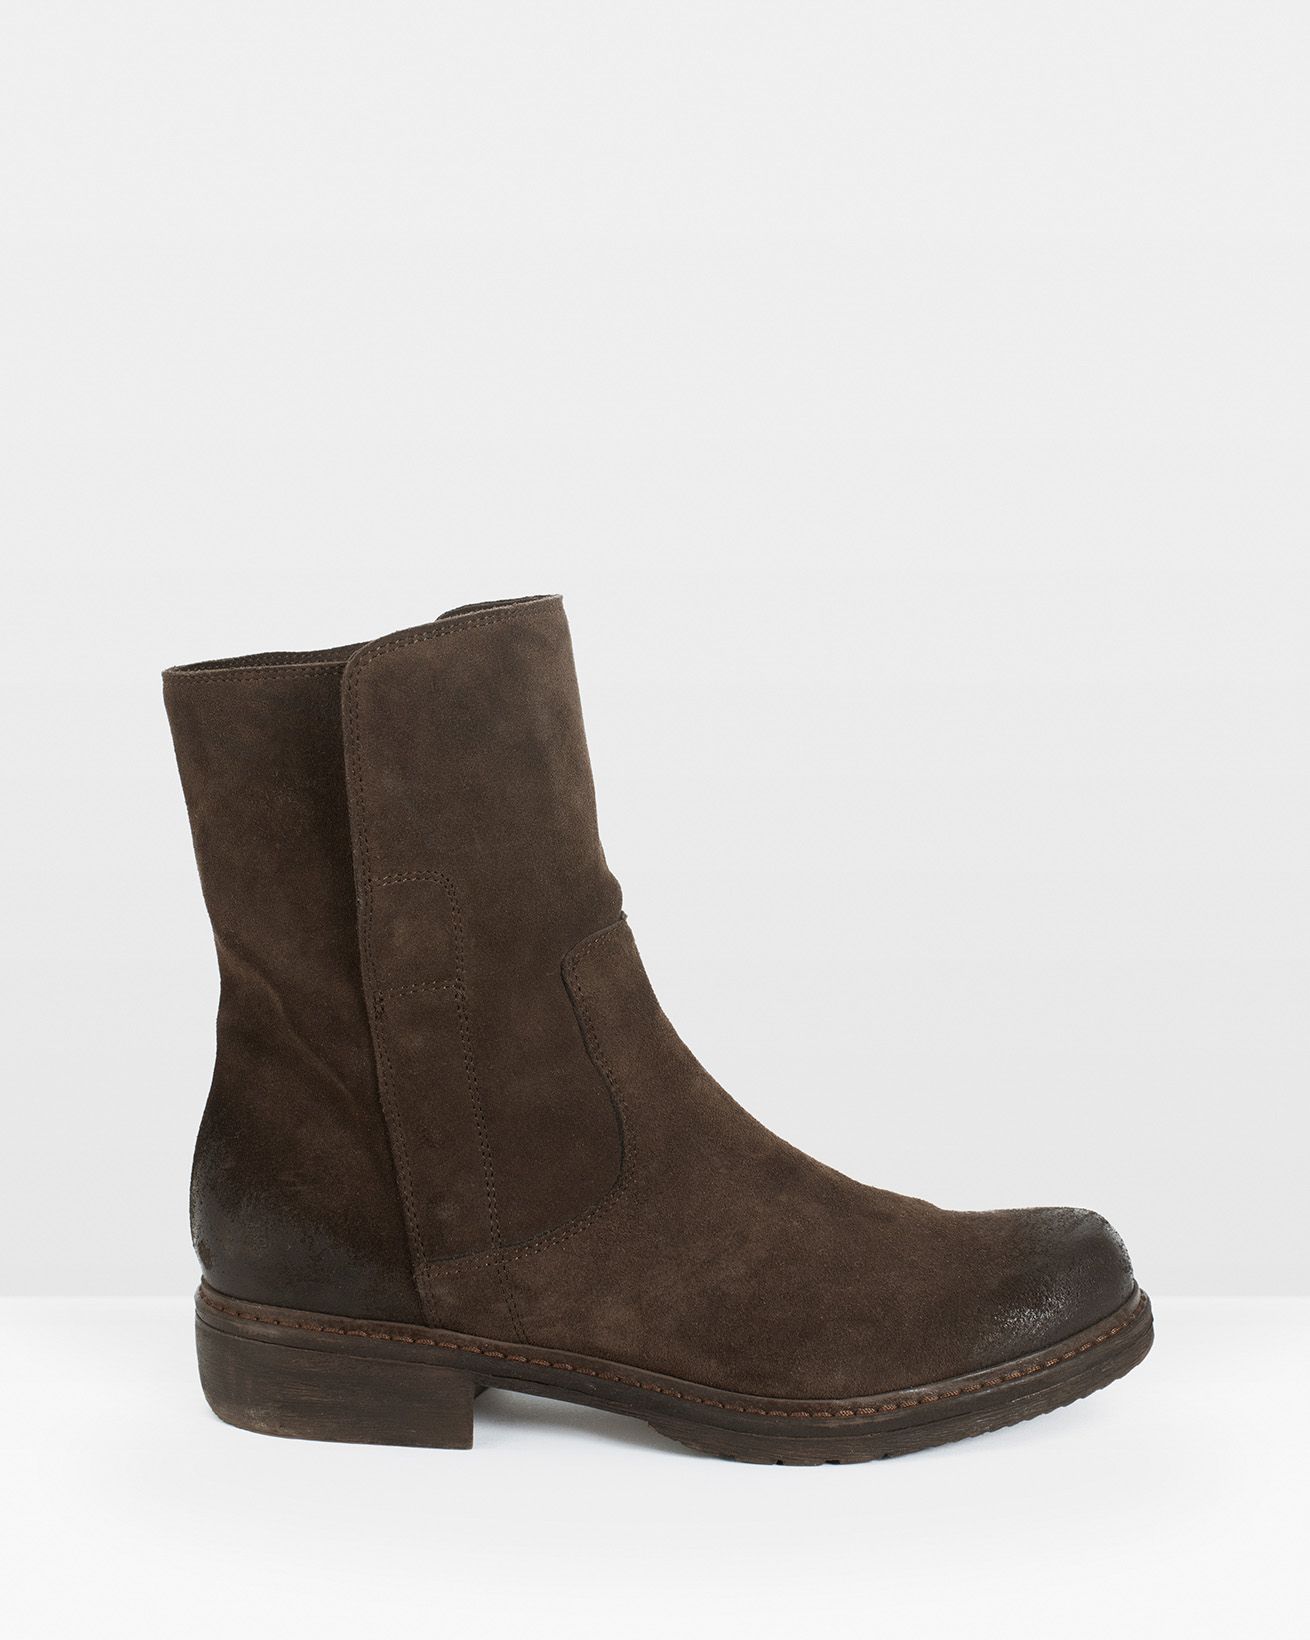 Essential Leather Ankle Boots